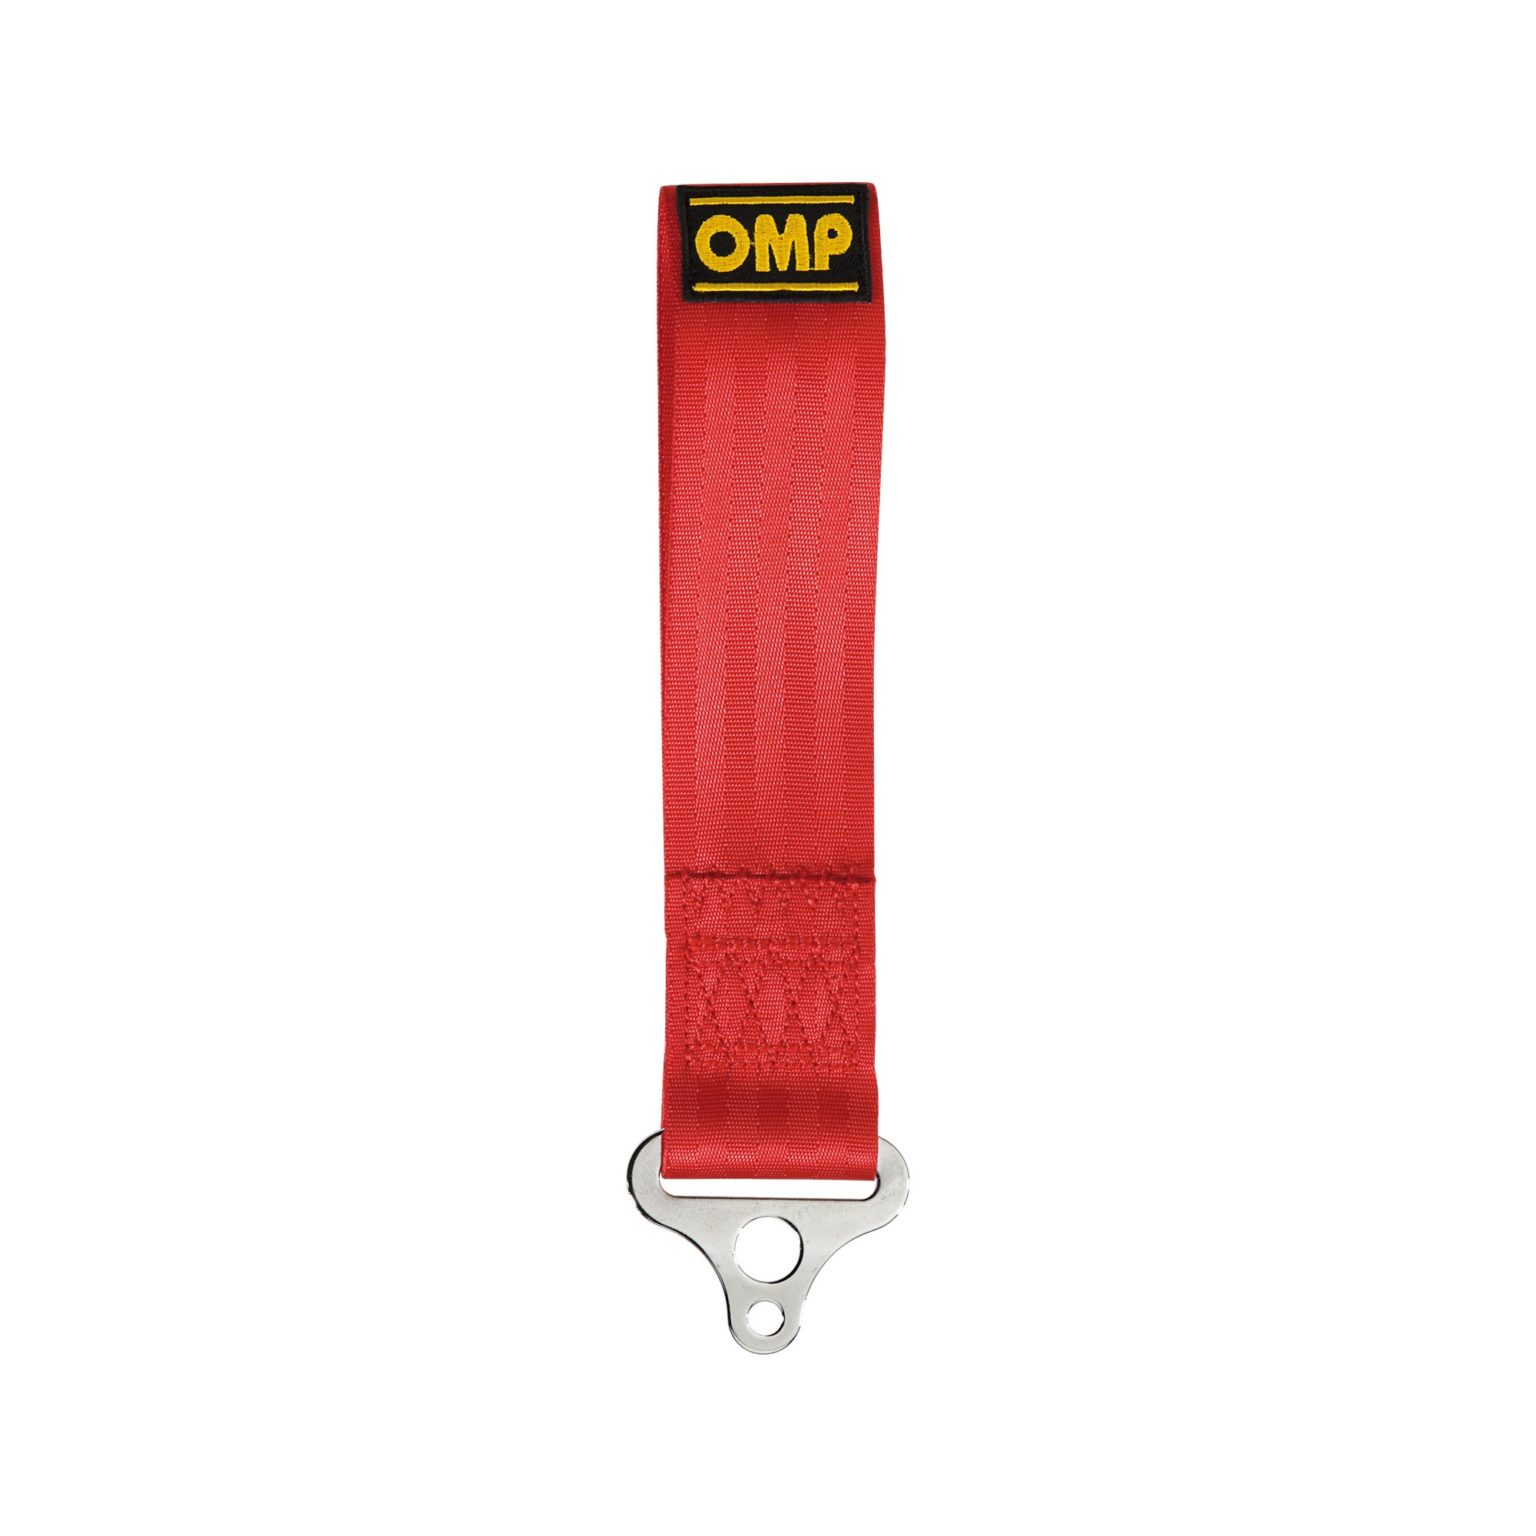 OMP STRAP TOW HOOK